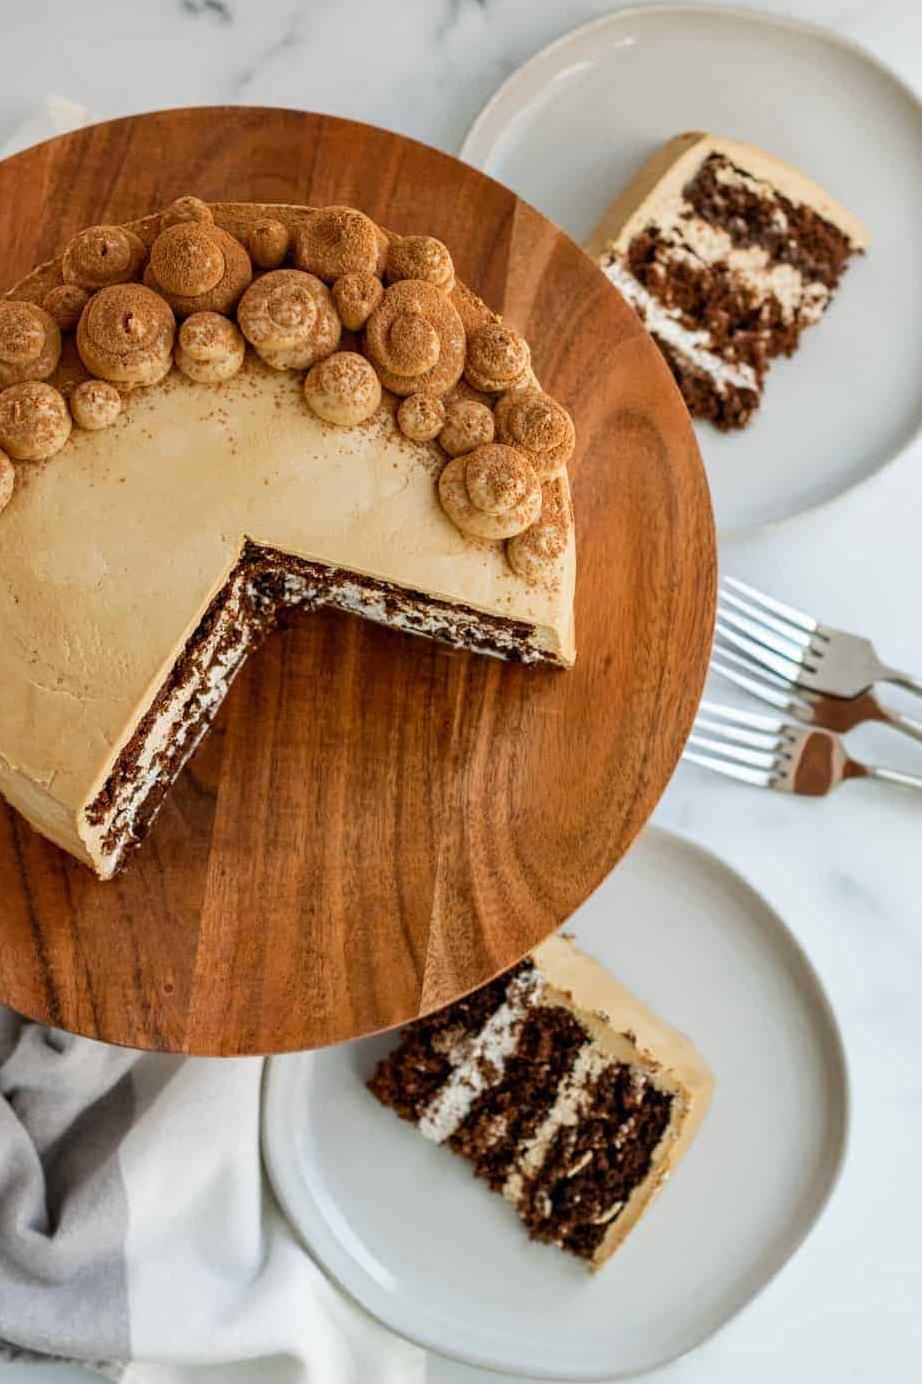  Step aside, ordinary cakes, this chocolate mocha cake is here to steal the show